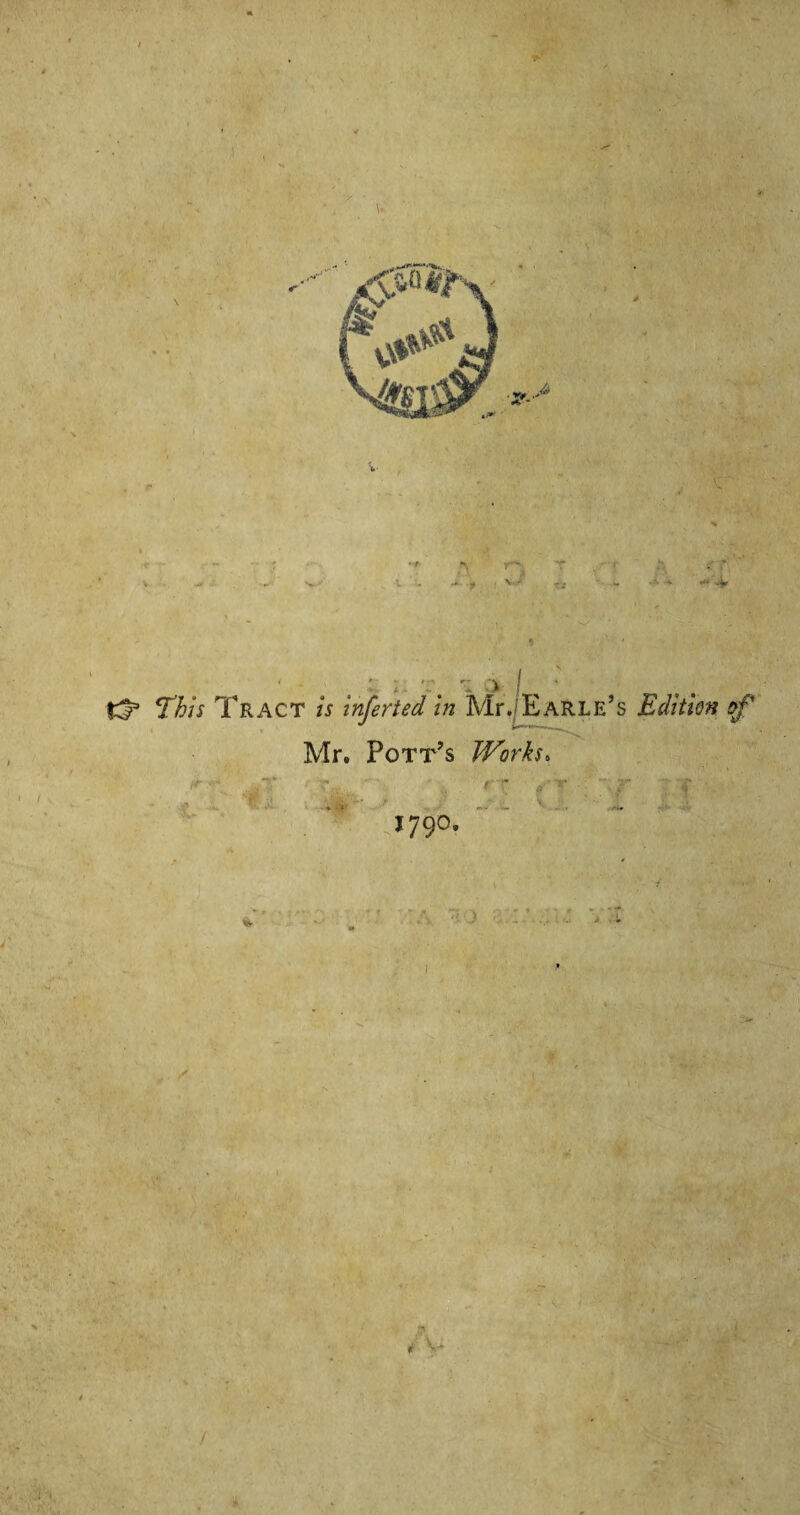 *v r-\ t -j ‘This Tract *j inferted in Mr. Earle’s Edition of Mr. Pott’s Works. 1790, r - .. - Vi. A 5.0 # V-